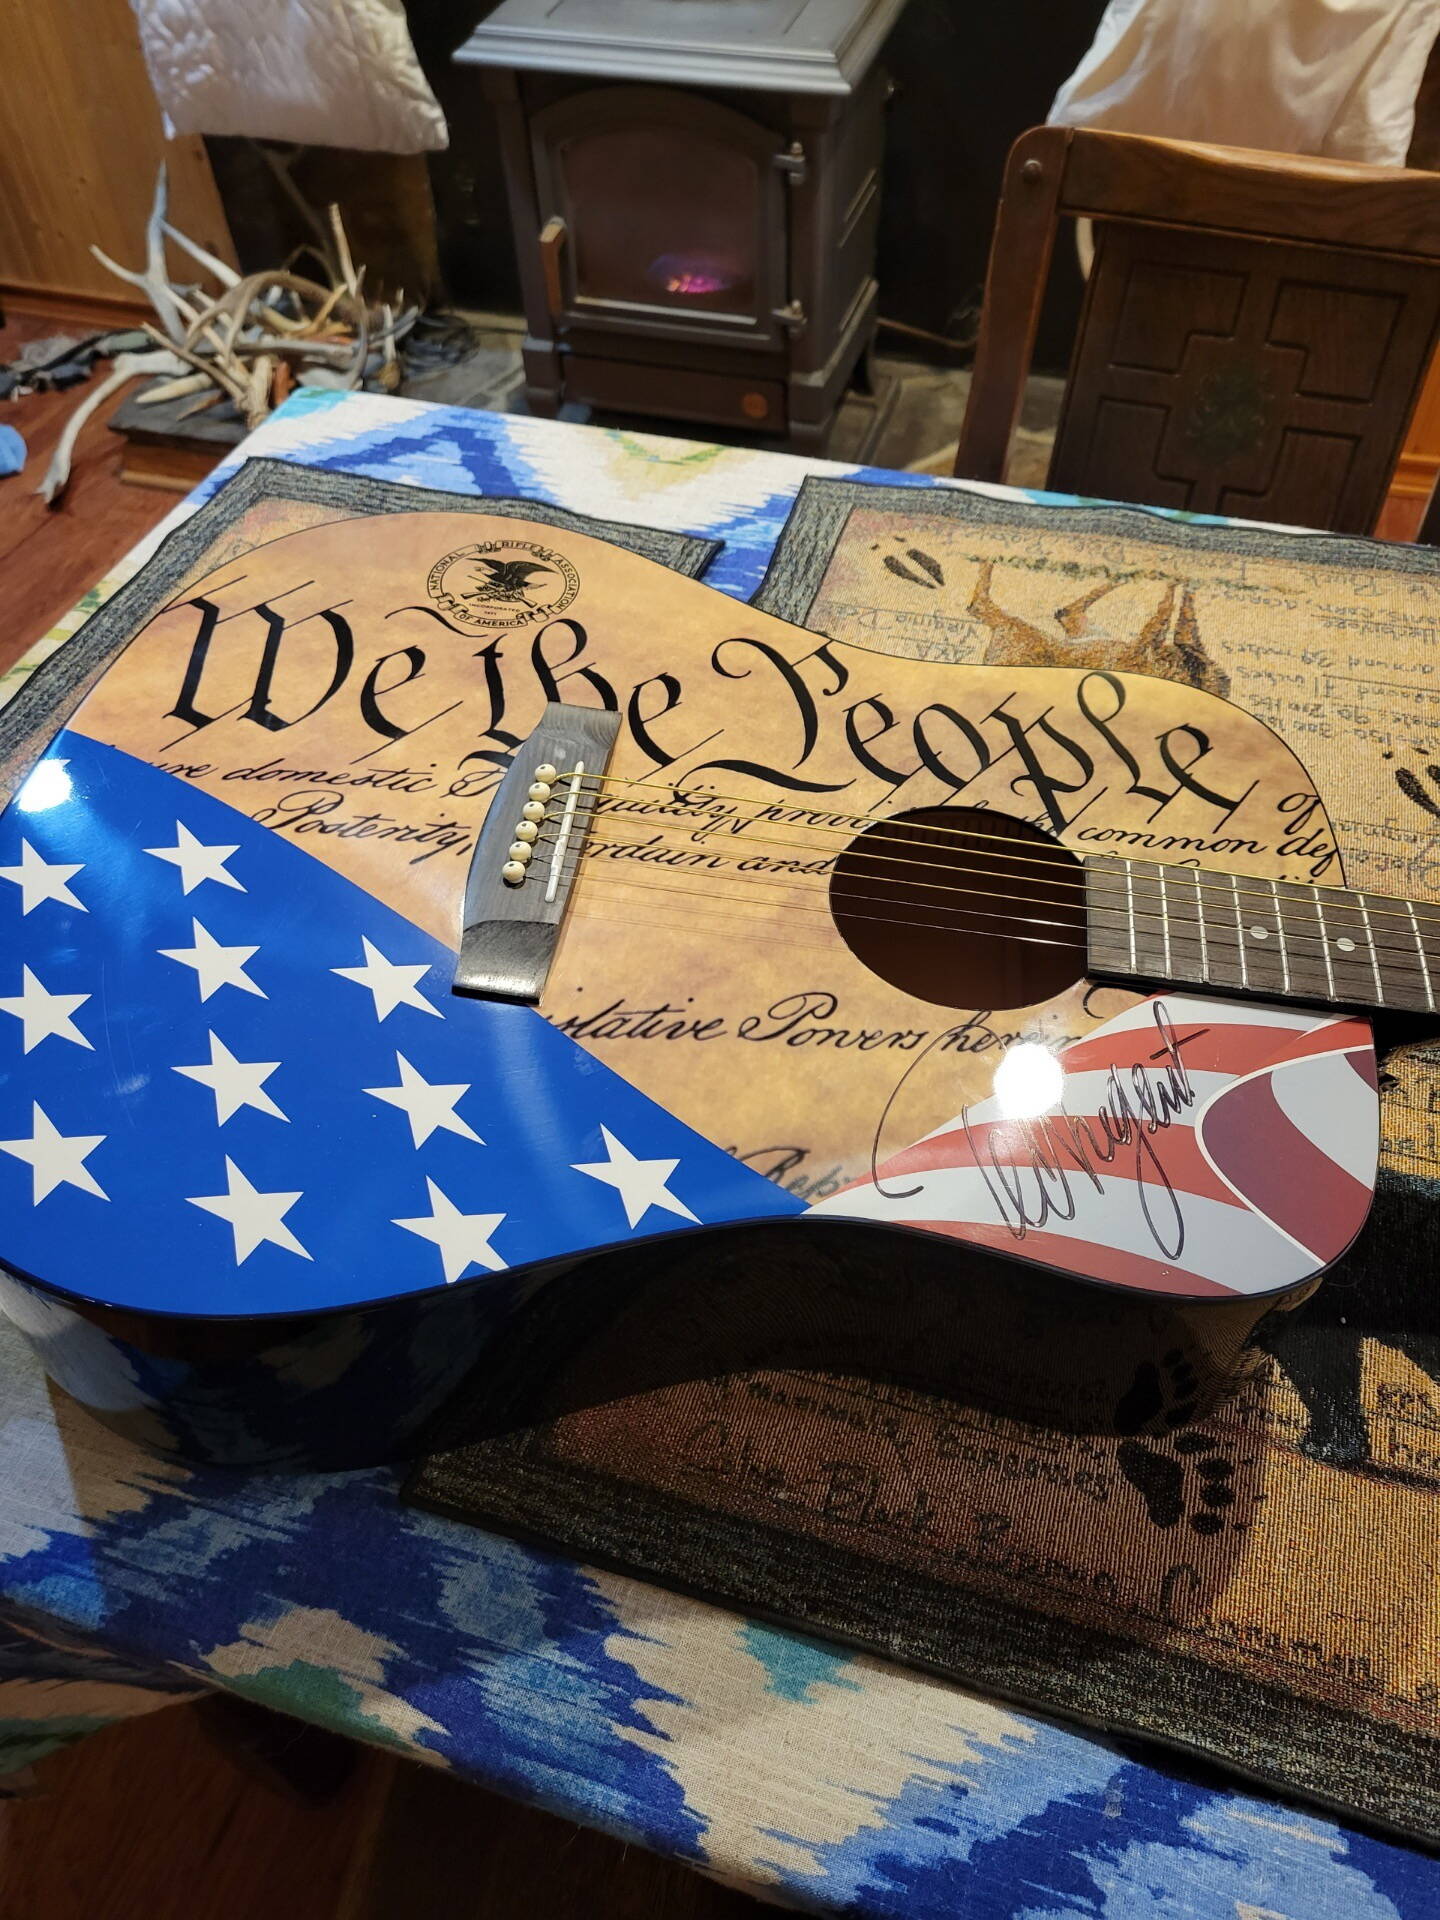 A custom guitar signed by Ted Nugent is among the items being auctioned during this year’s Friends of NRA — Juneau fundraising banquet on Saturday at Centennial Hall. (Photo courtesy of Friends of NRA — Juneau)